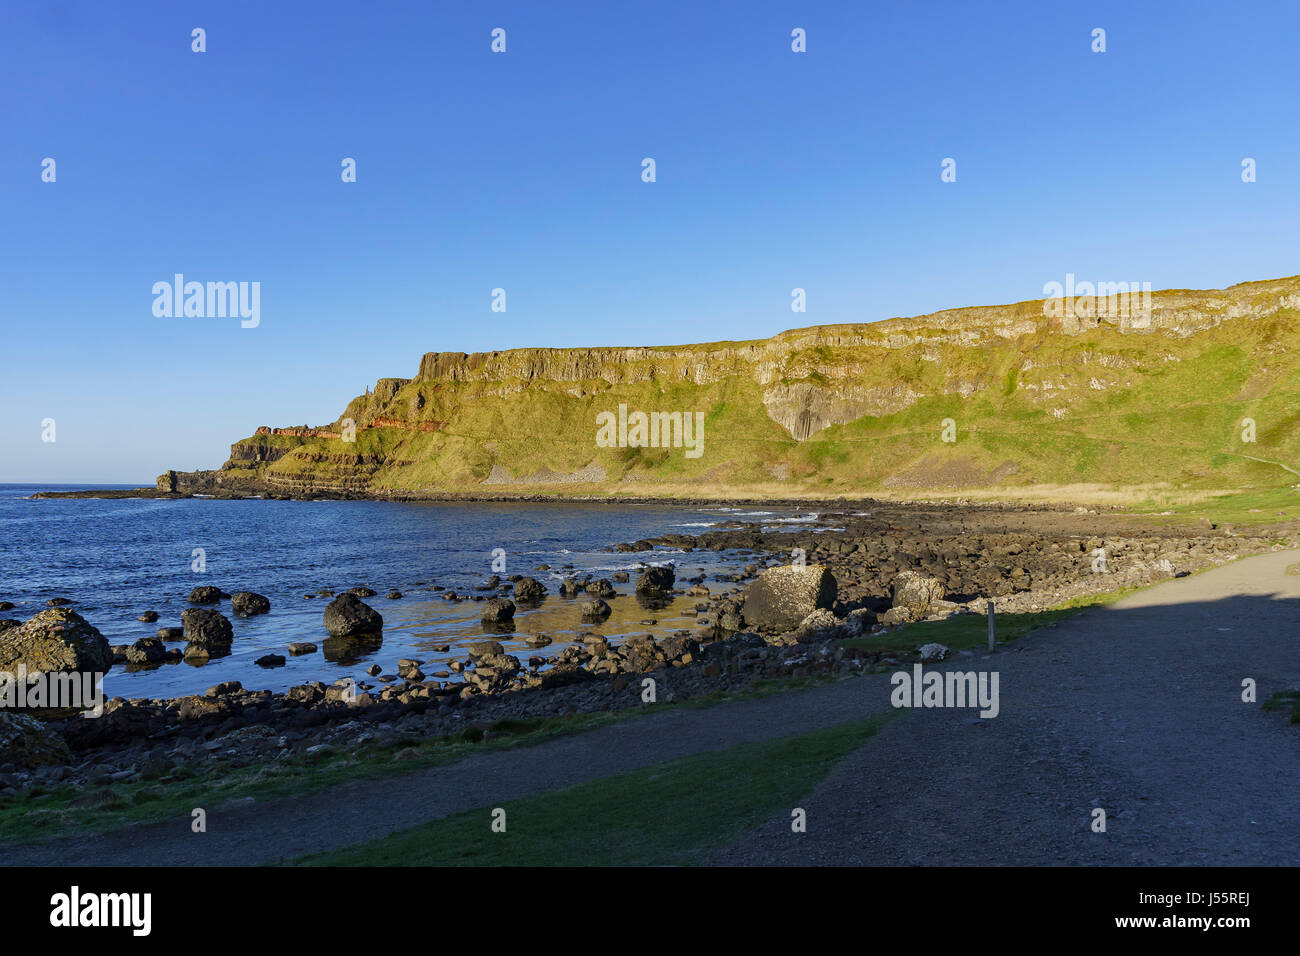 The famous ancient volcanic eruption - Giant's Causeway of County Antrim, Northern Ireland Stock Photo